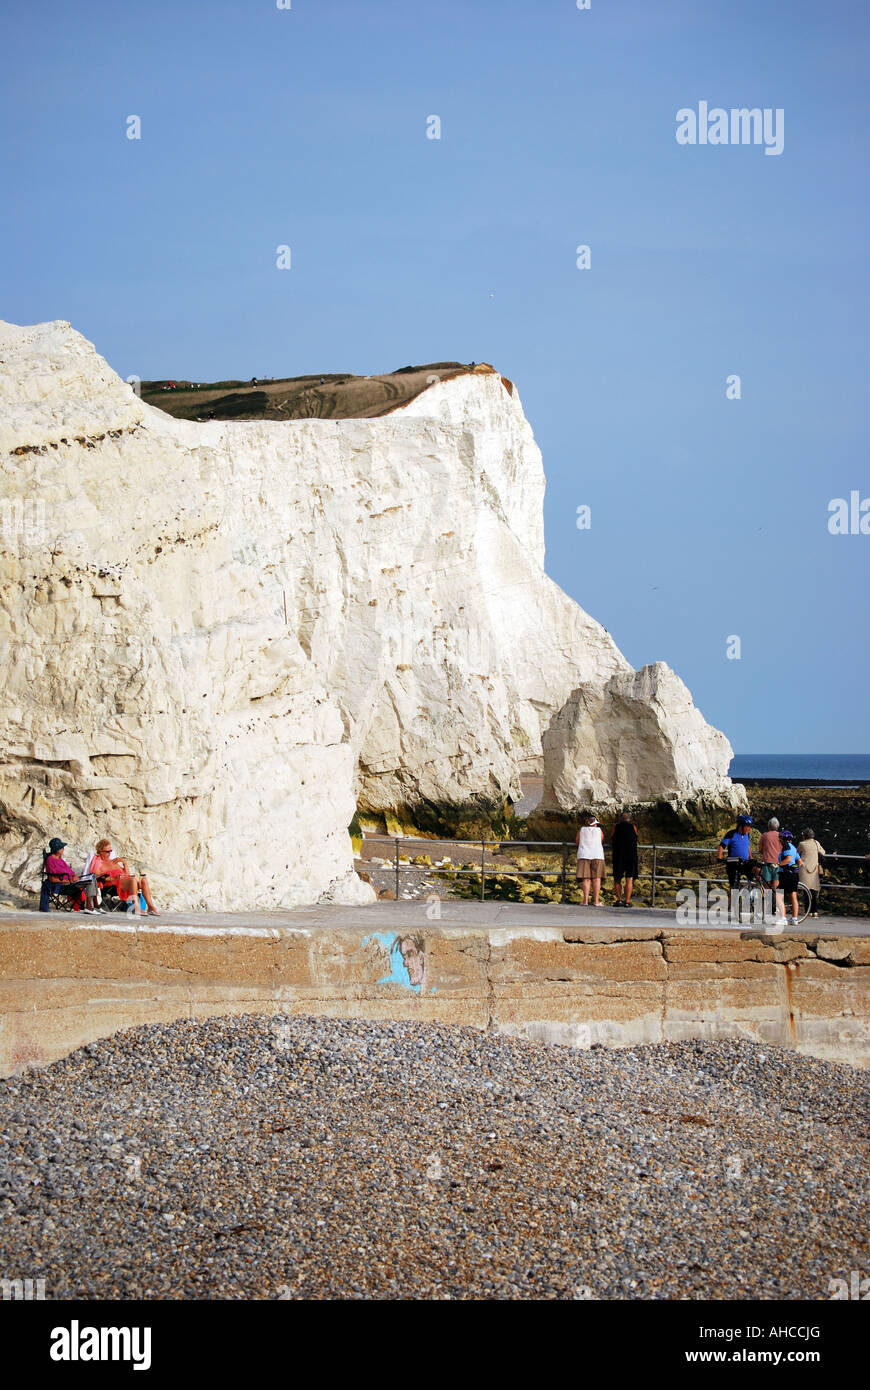 Beachy Head de Seaford, Jalhay, East Sussex, Angleterre, Royaume-Uni Banque D'Images